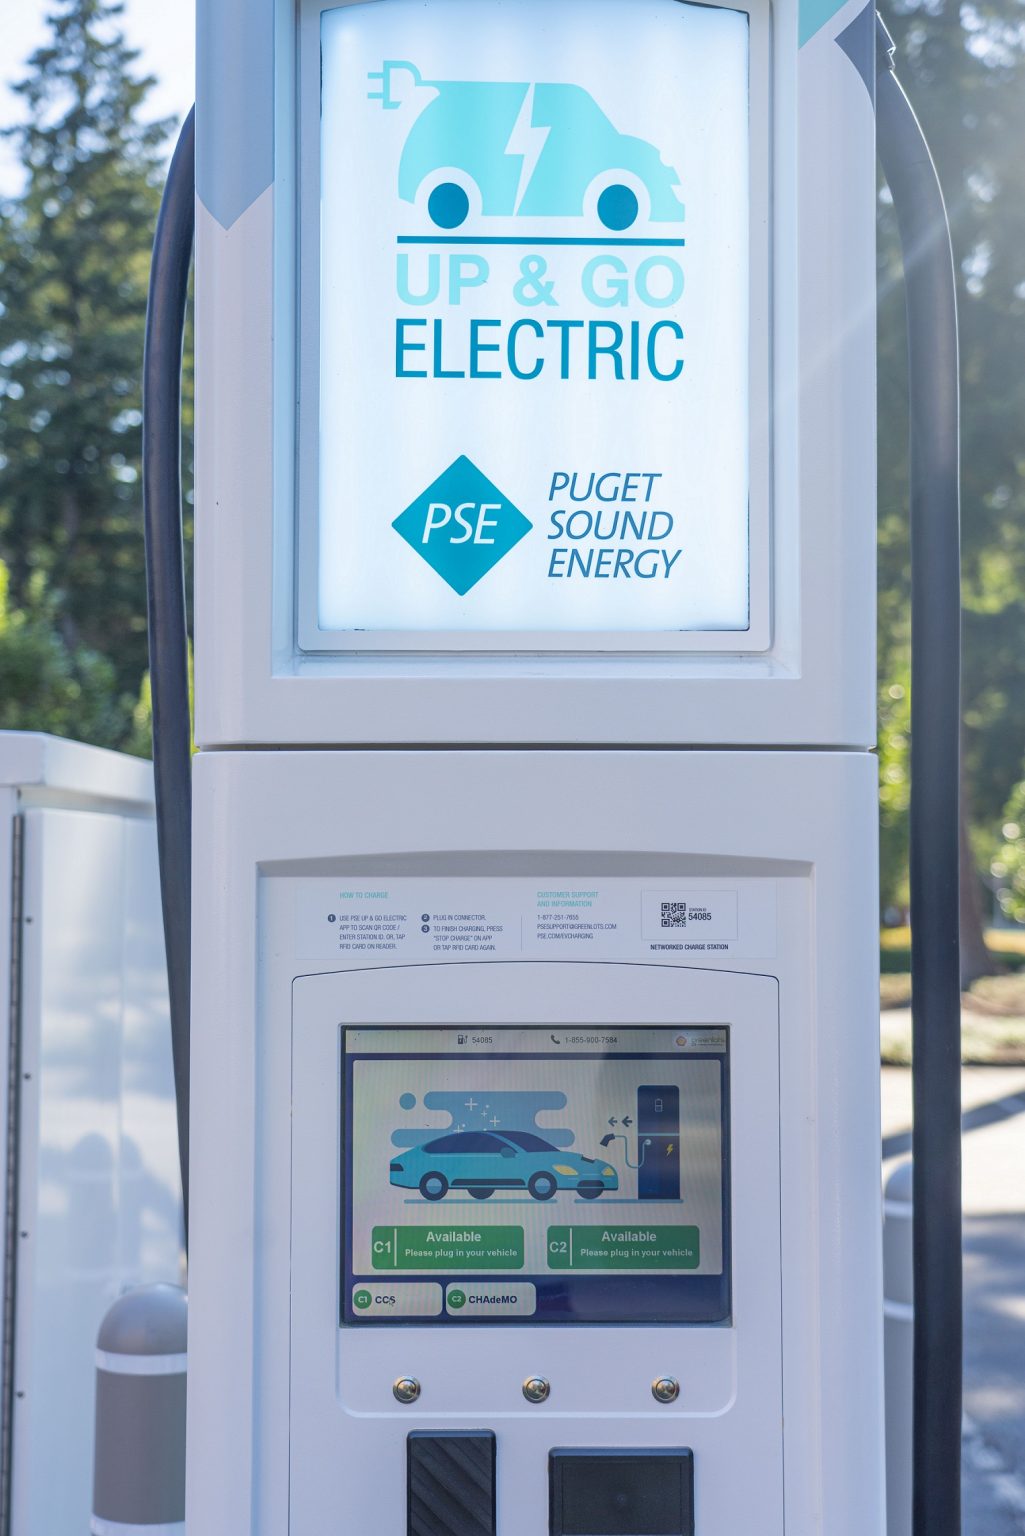 re-charge-your-car-in-lacey-while-you-shop-thanks-to-puget-sound-energy